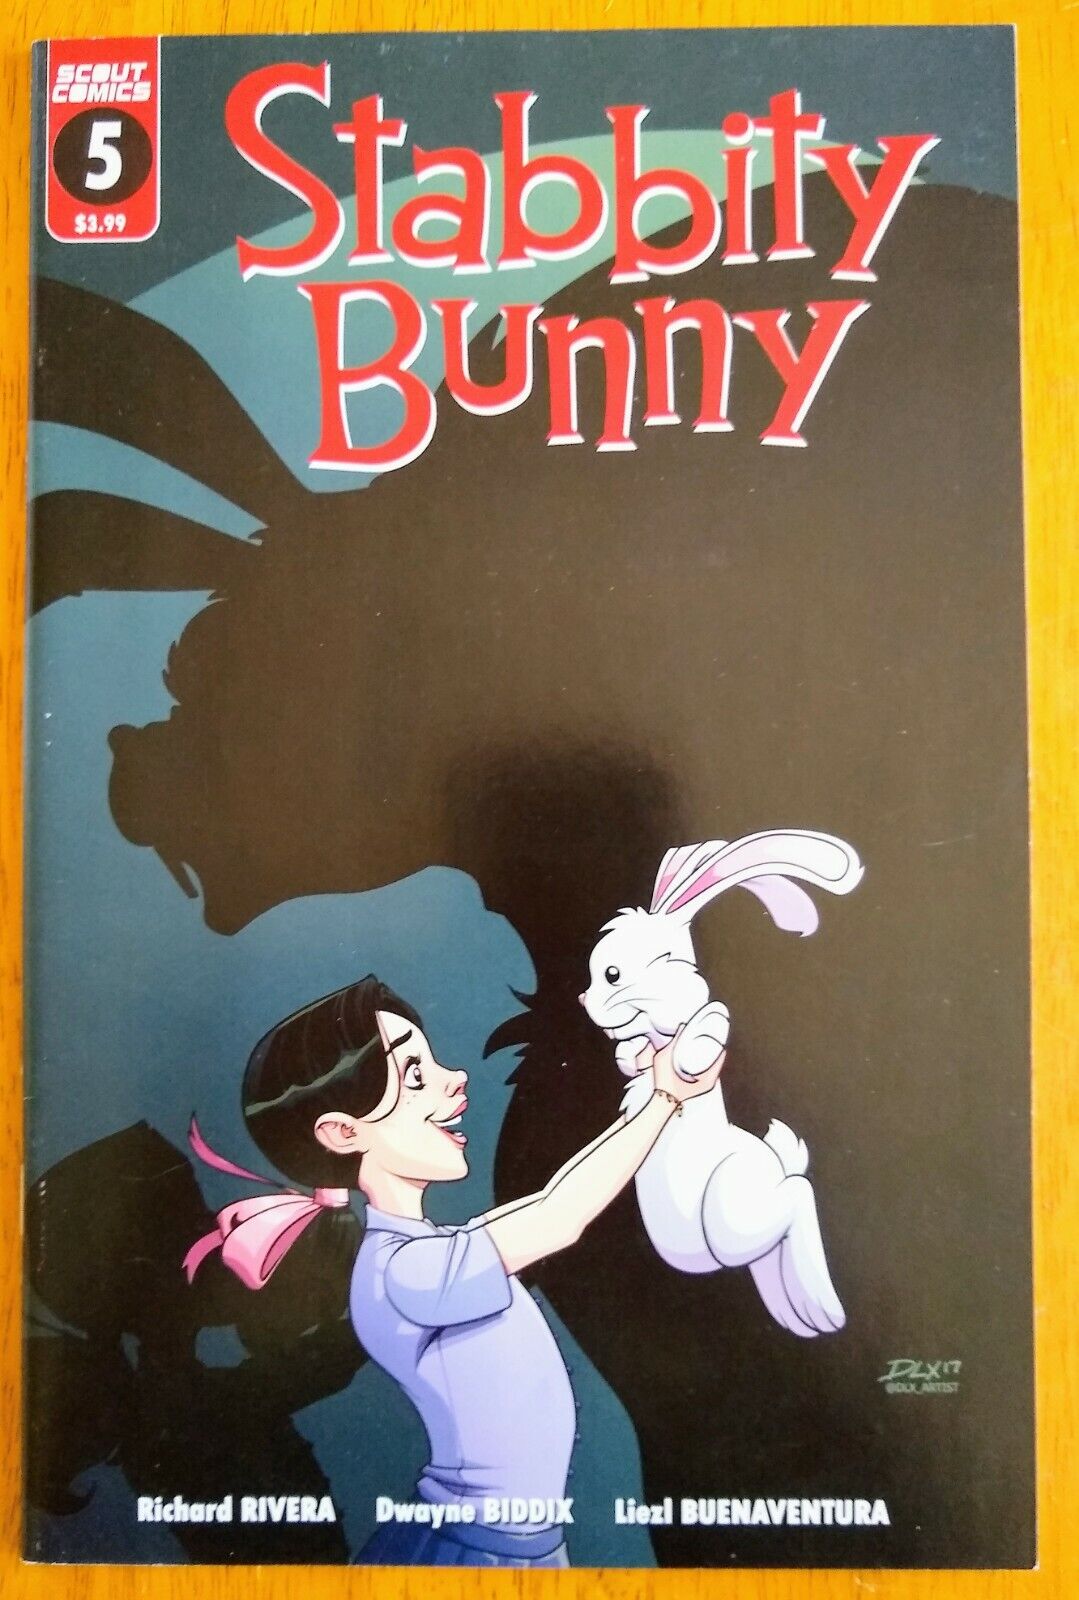 Stabbity Bunny #5 Scout Comic Book 2018 Indie Richard Rivera